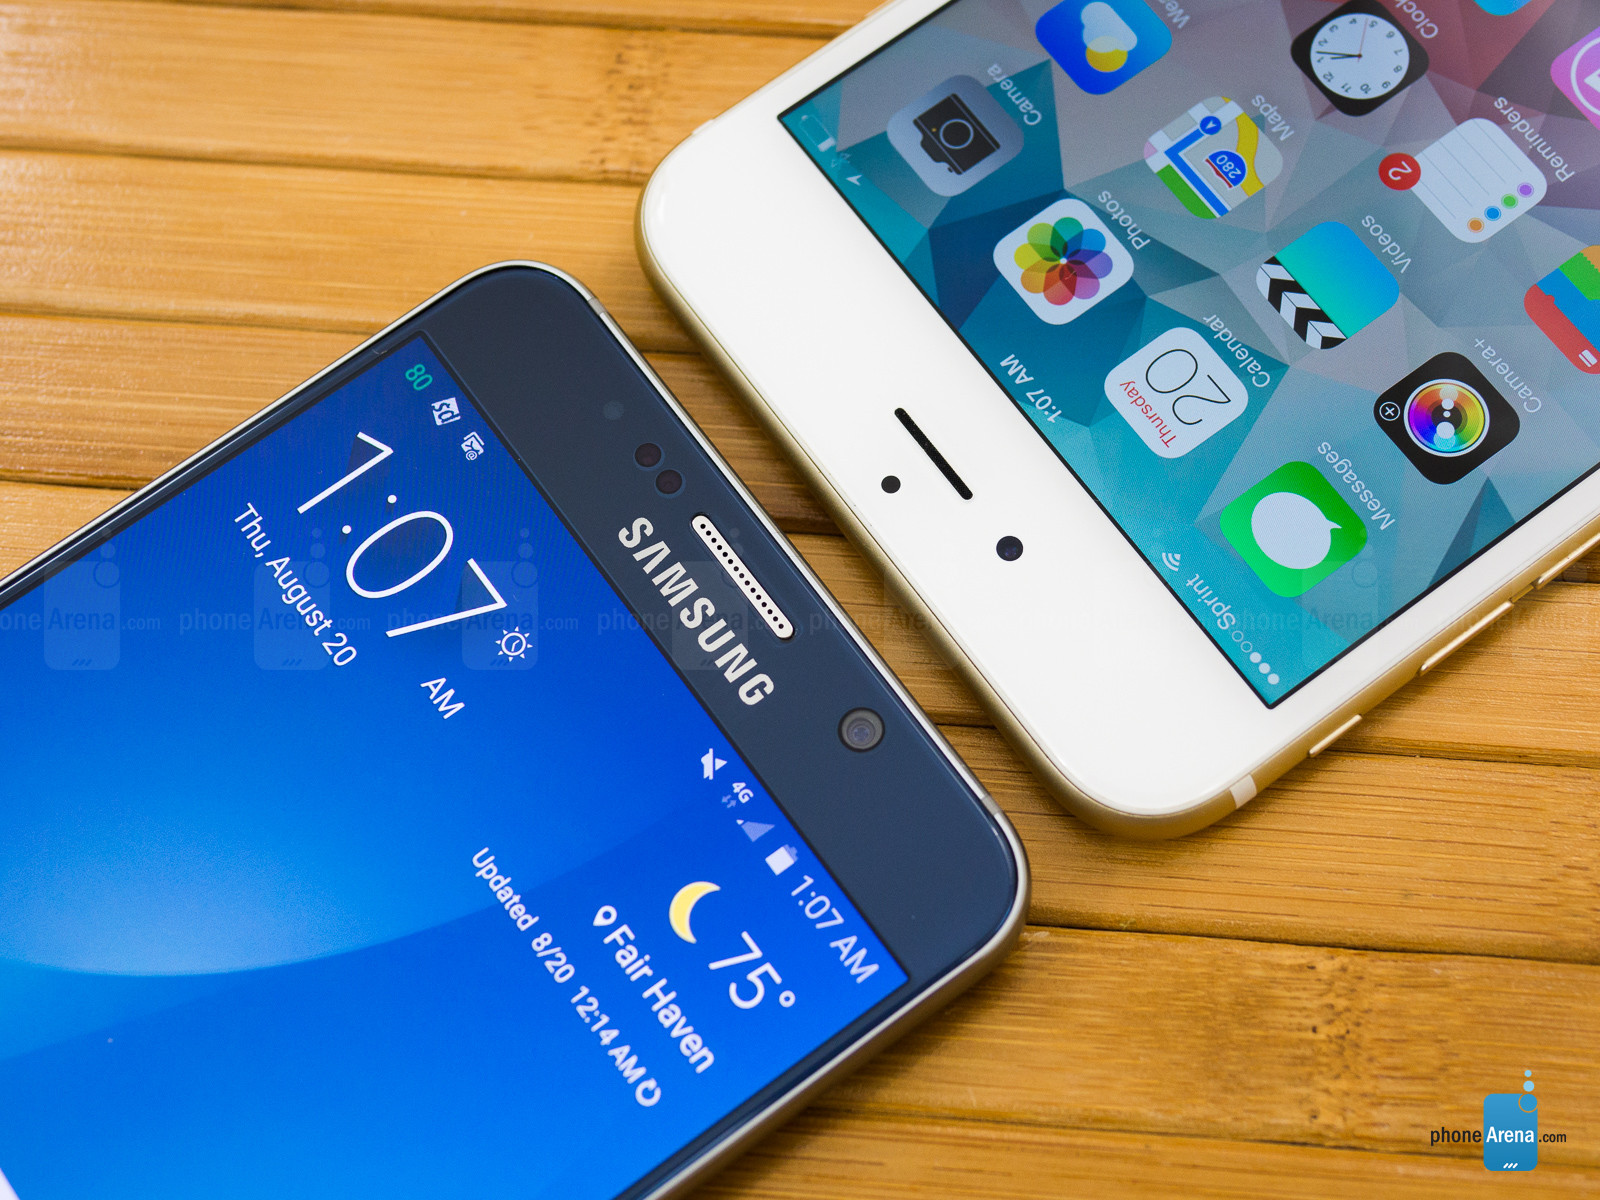 Samsung Galaxy Note5 Vs Apple Iphone 6 Plus - Samsung Group , HD Wallpaper & Backgrounds